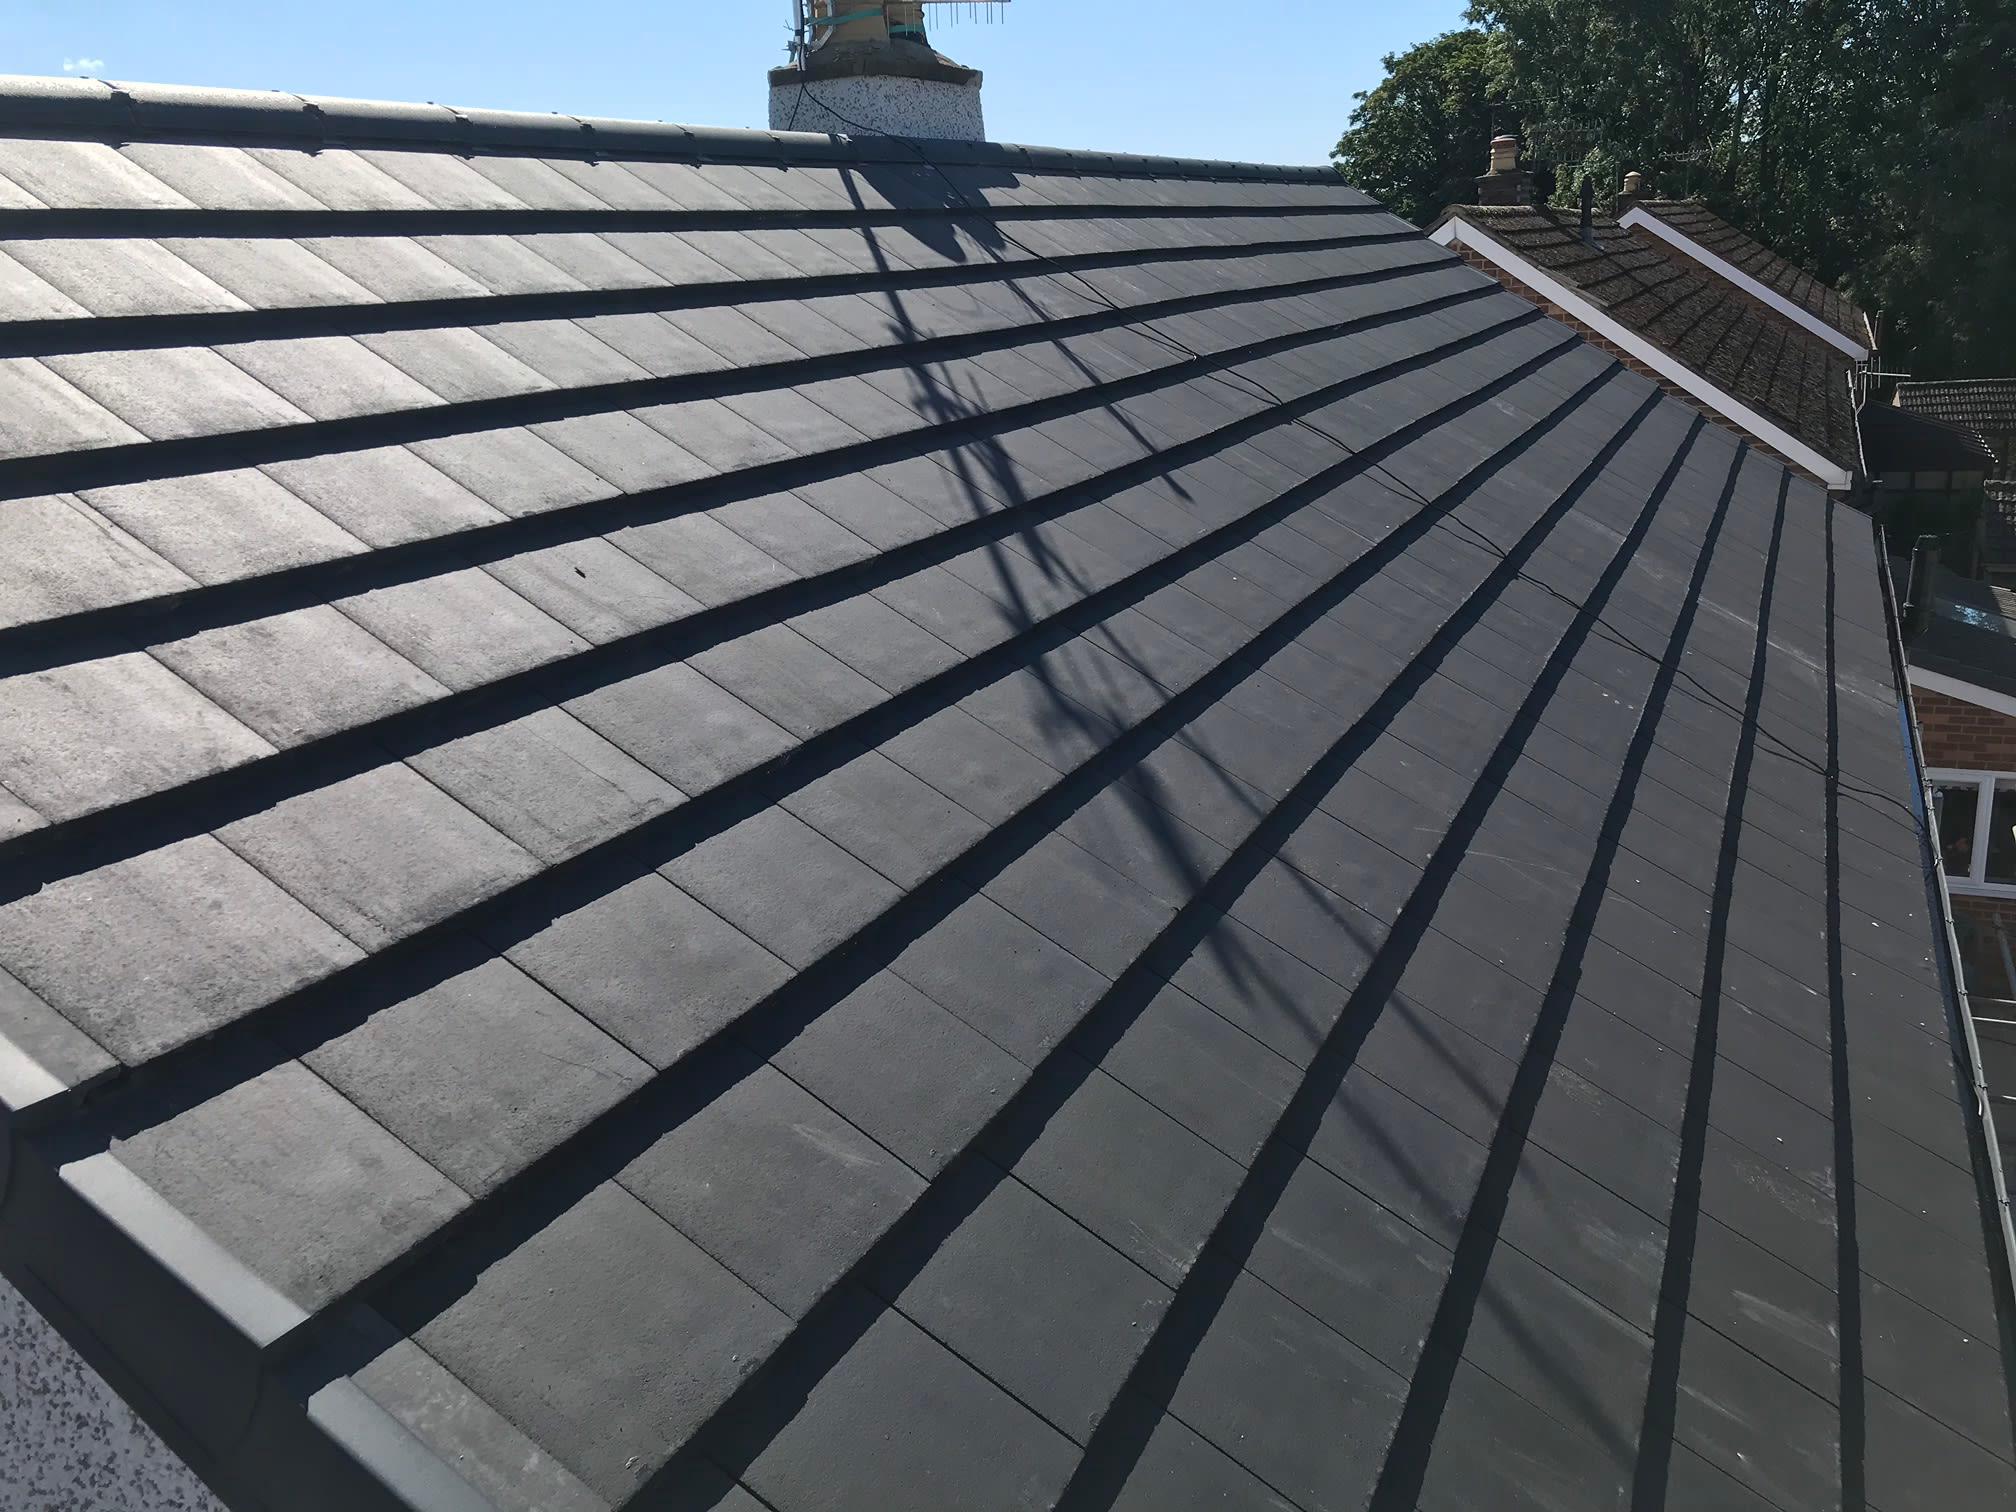 Images B. Halsall North West Roofing Ltd